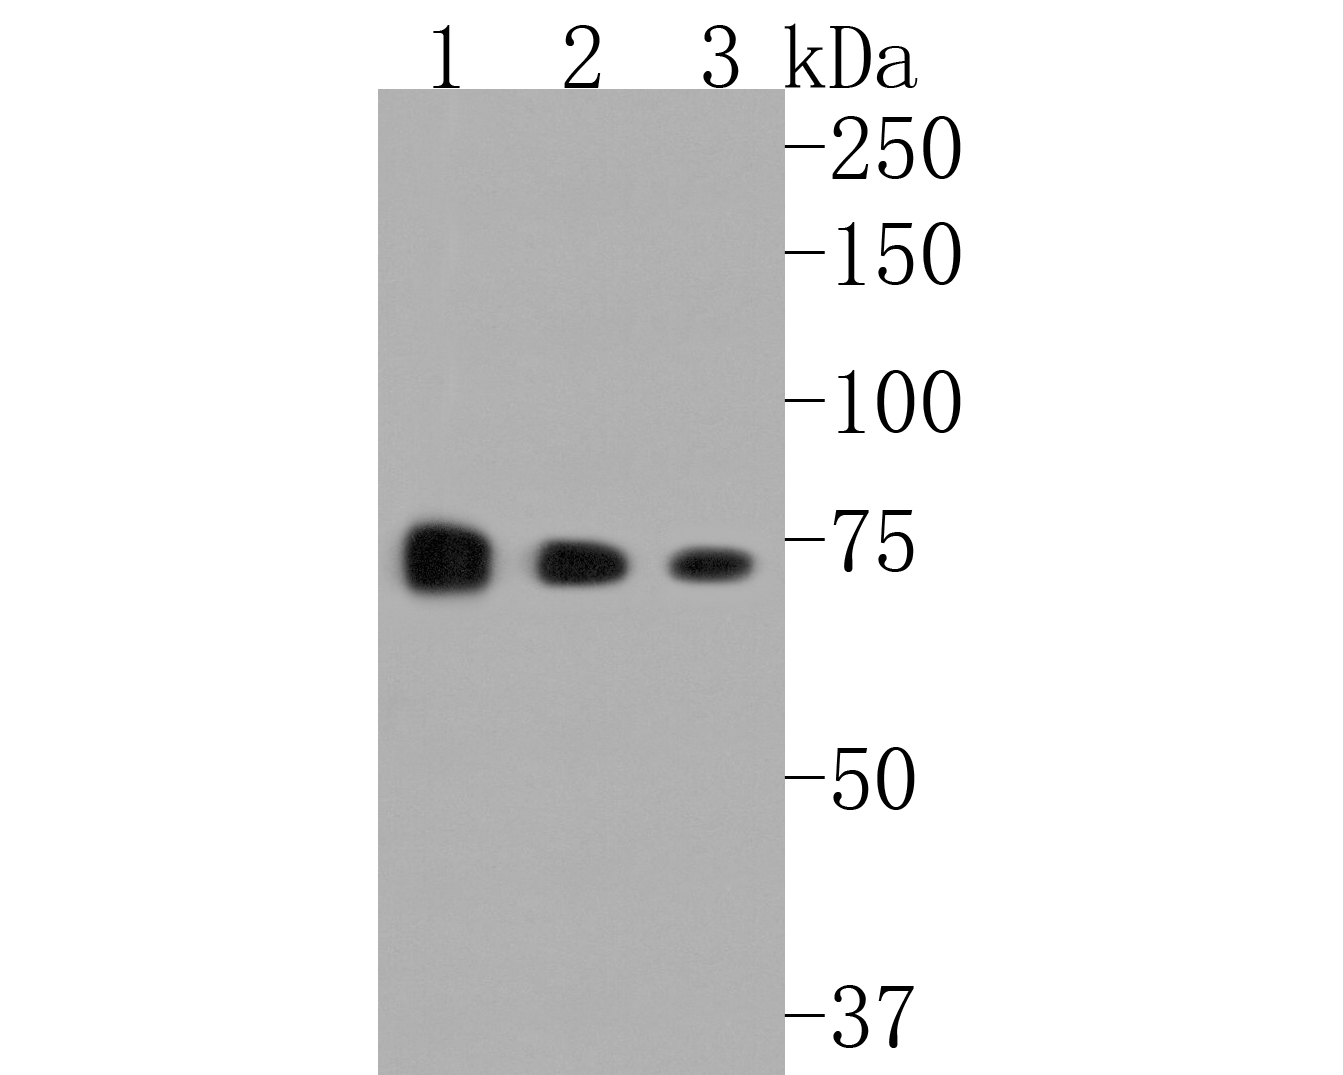 Western blot analysis of PKC epsilon on different lysates. Proteins were transferred to a PVDF membrane and blocked with 5% BSA in PBS for 1 hour at room temperature. The primary antibody (ET1704-85, 1/500) was used in 5% BSA at room temperature for 2 hours. Goat Anti-Rabbit IgG - HRP Secondary Antibody (HA1001) at 1:5,000 dilution was used for 1 hour at room temperature.<br />
Positive control: <br />
Lane 1: MCF-7 cell lysate<br />
Lane 2: Jurkat cell lysate<br />
Lane 3: HT-29 cell lysate